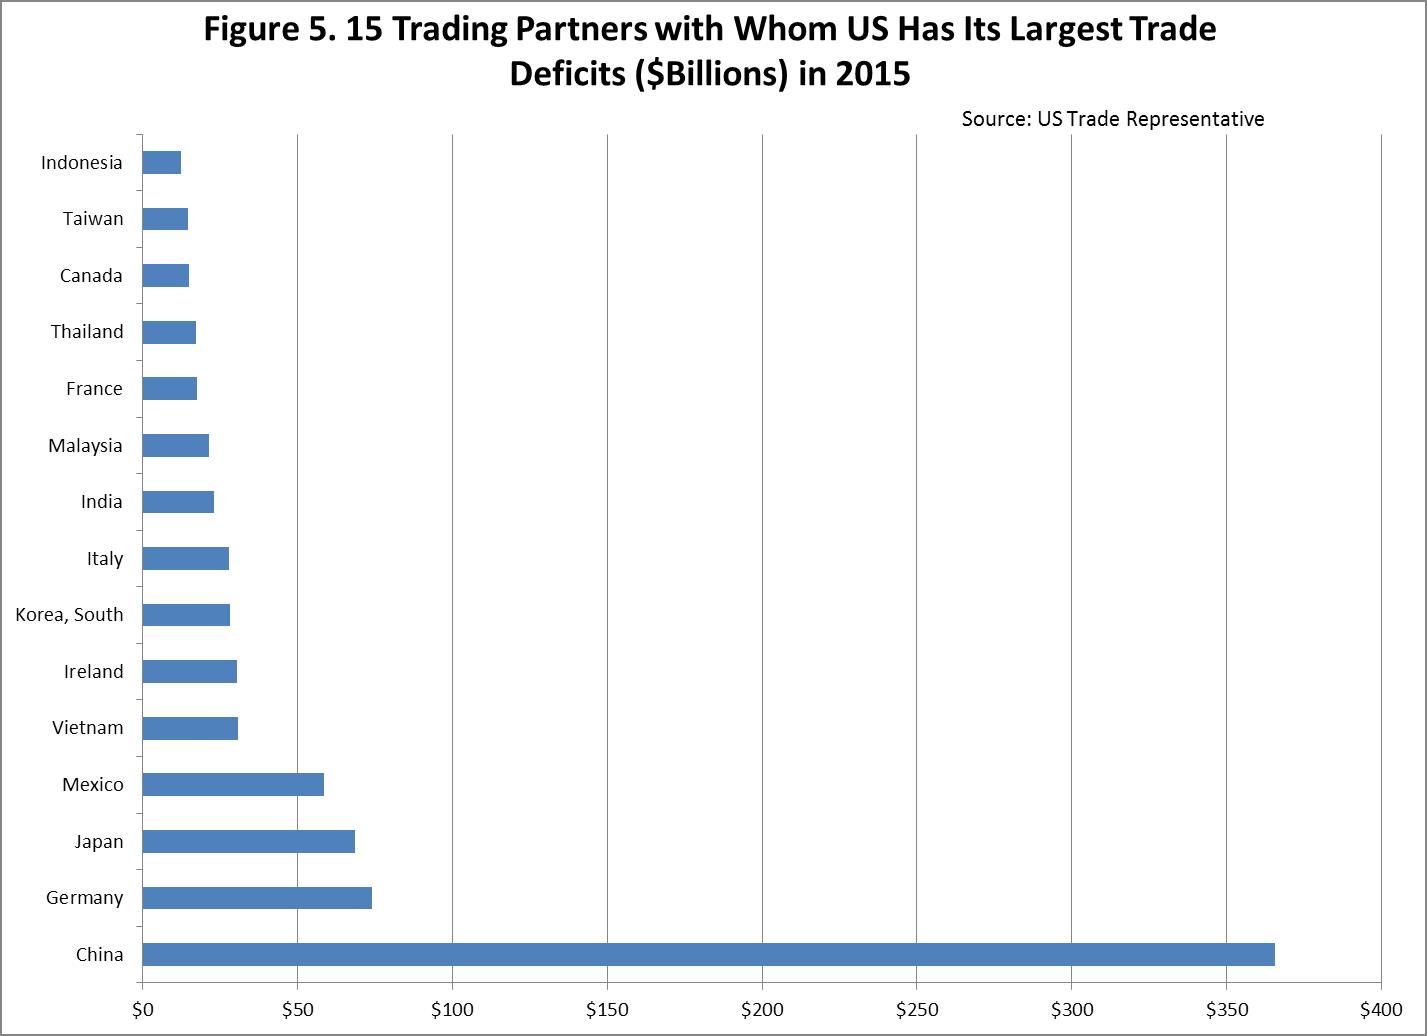 Trading Partners With Whom US Has Its Largest Trade Deficits 2015